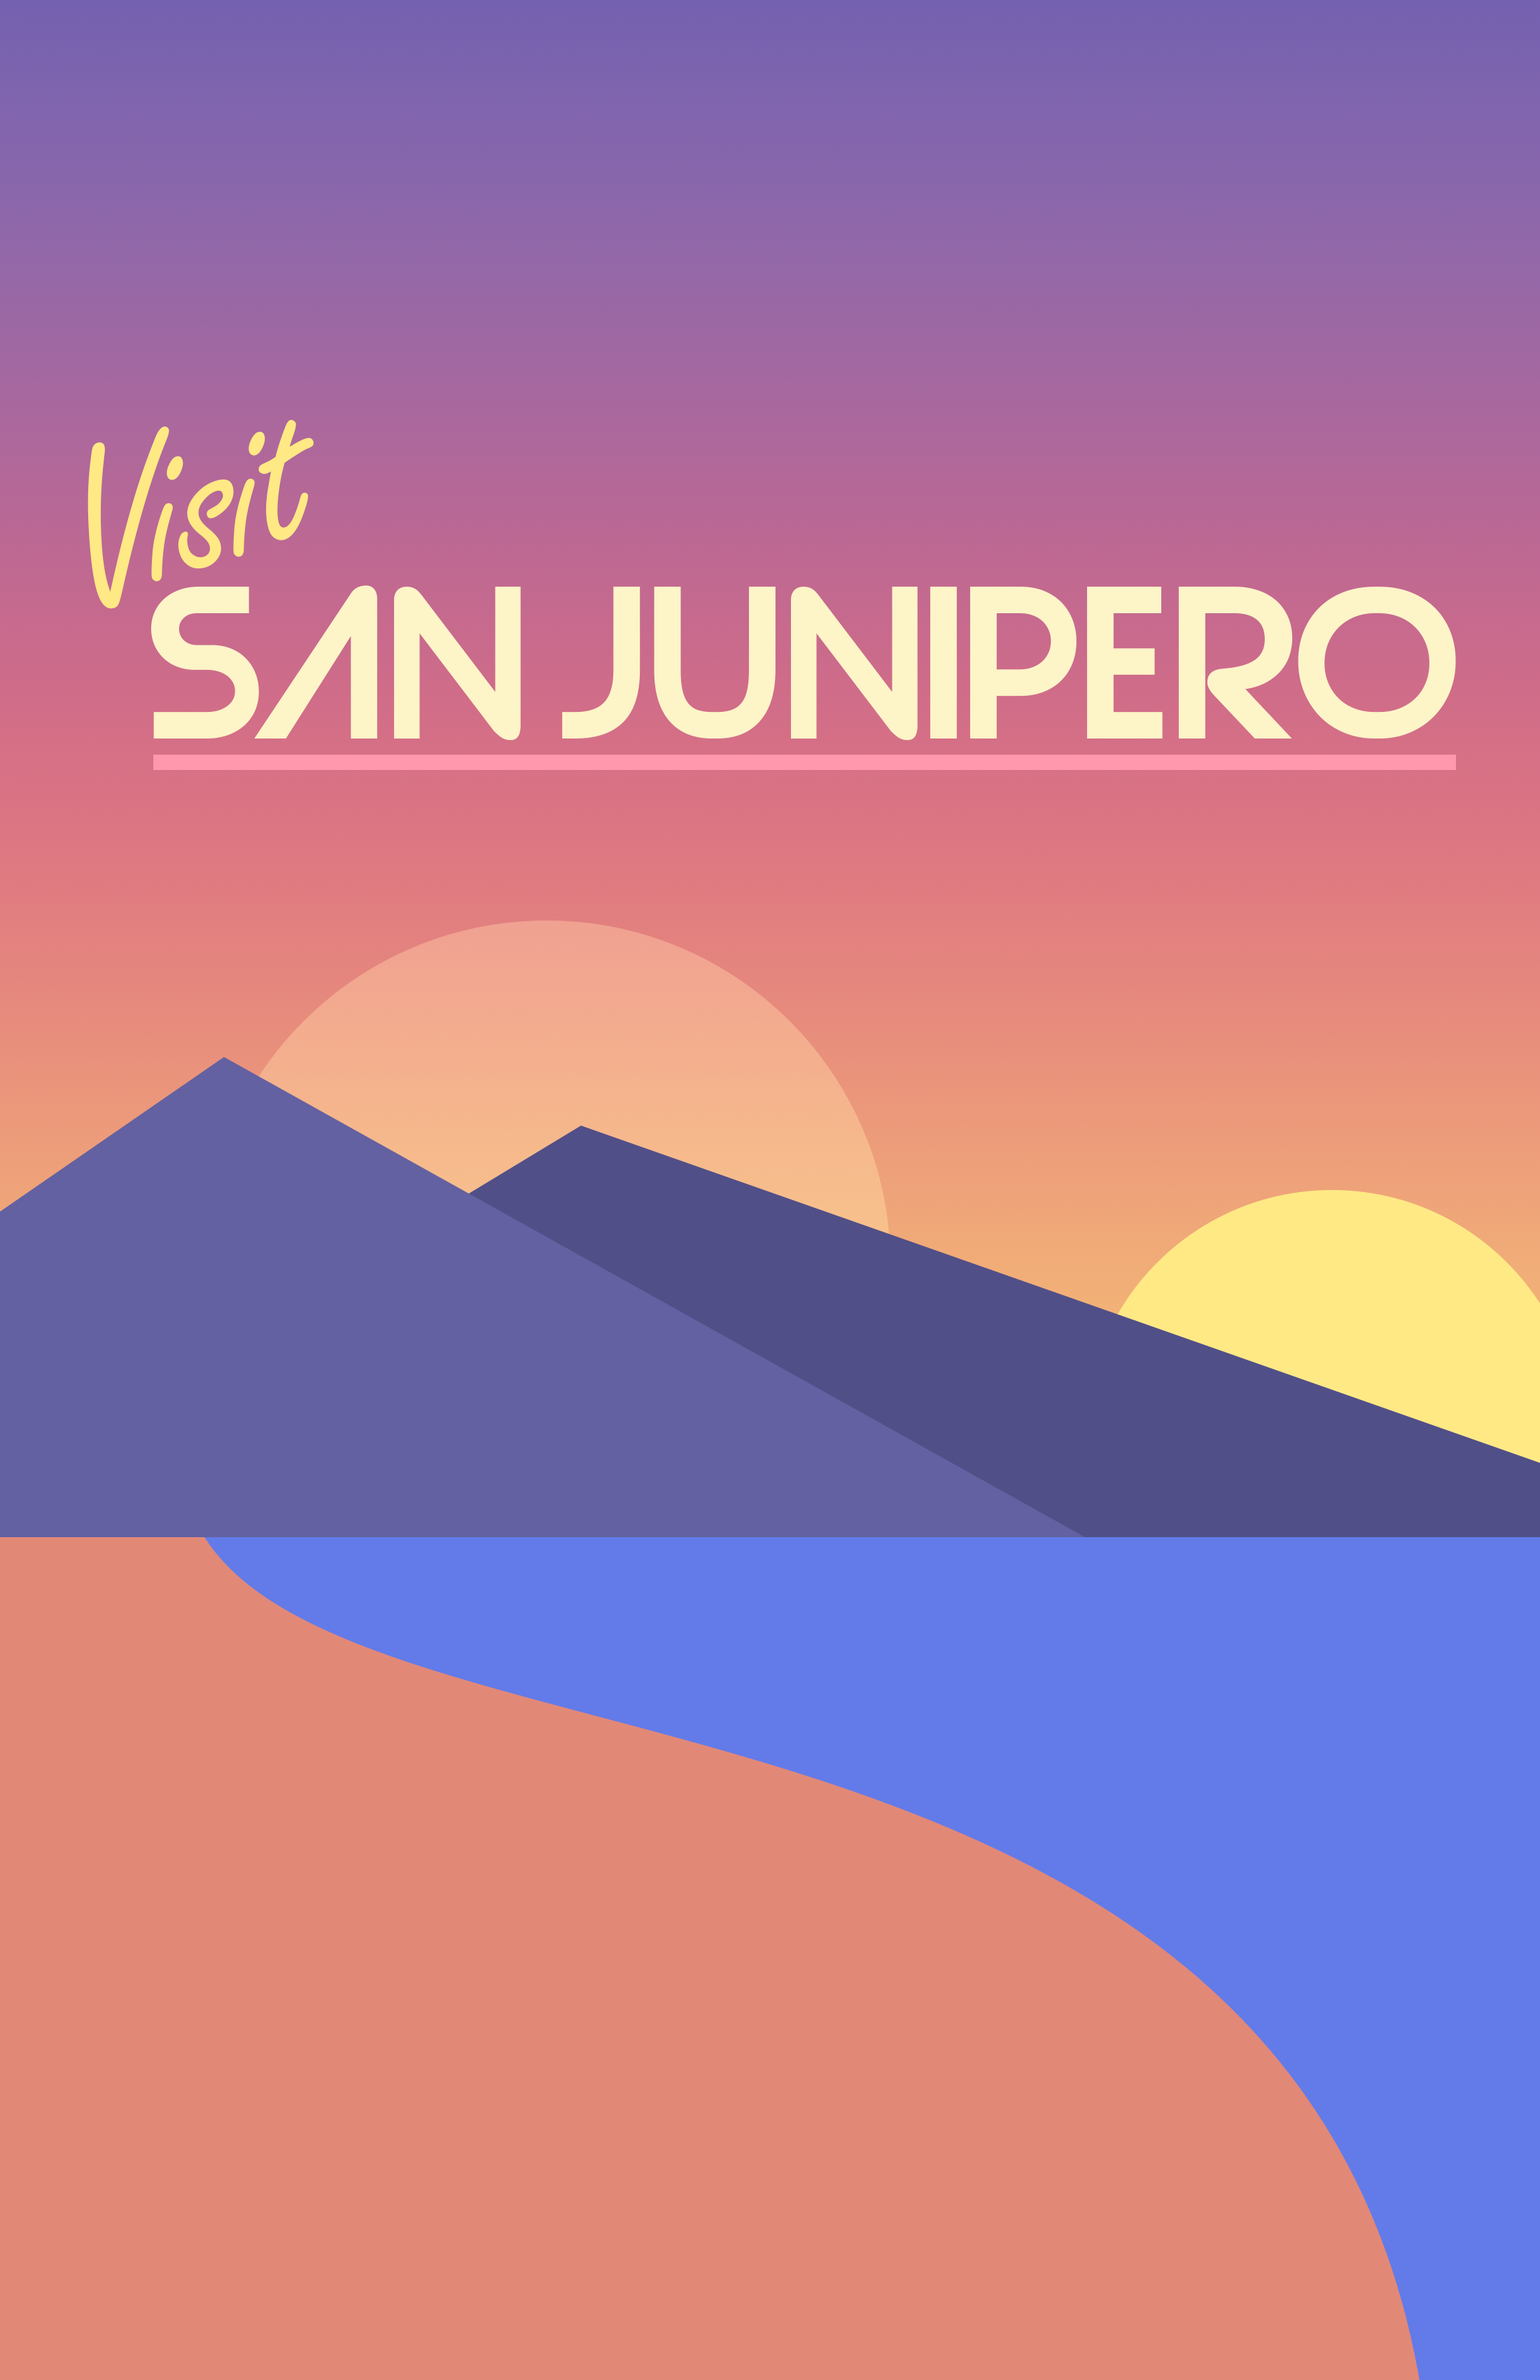 A poster for the ficticious city of San Junipero.